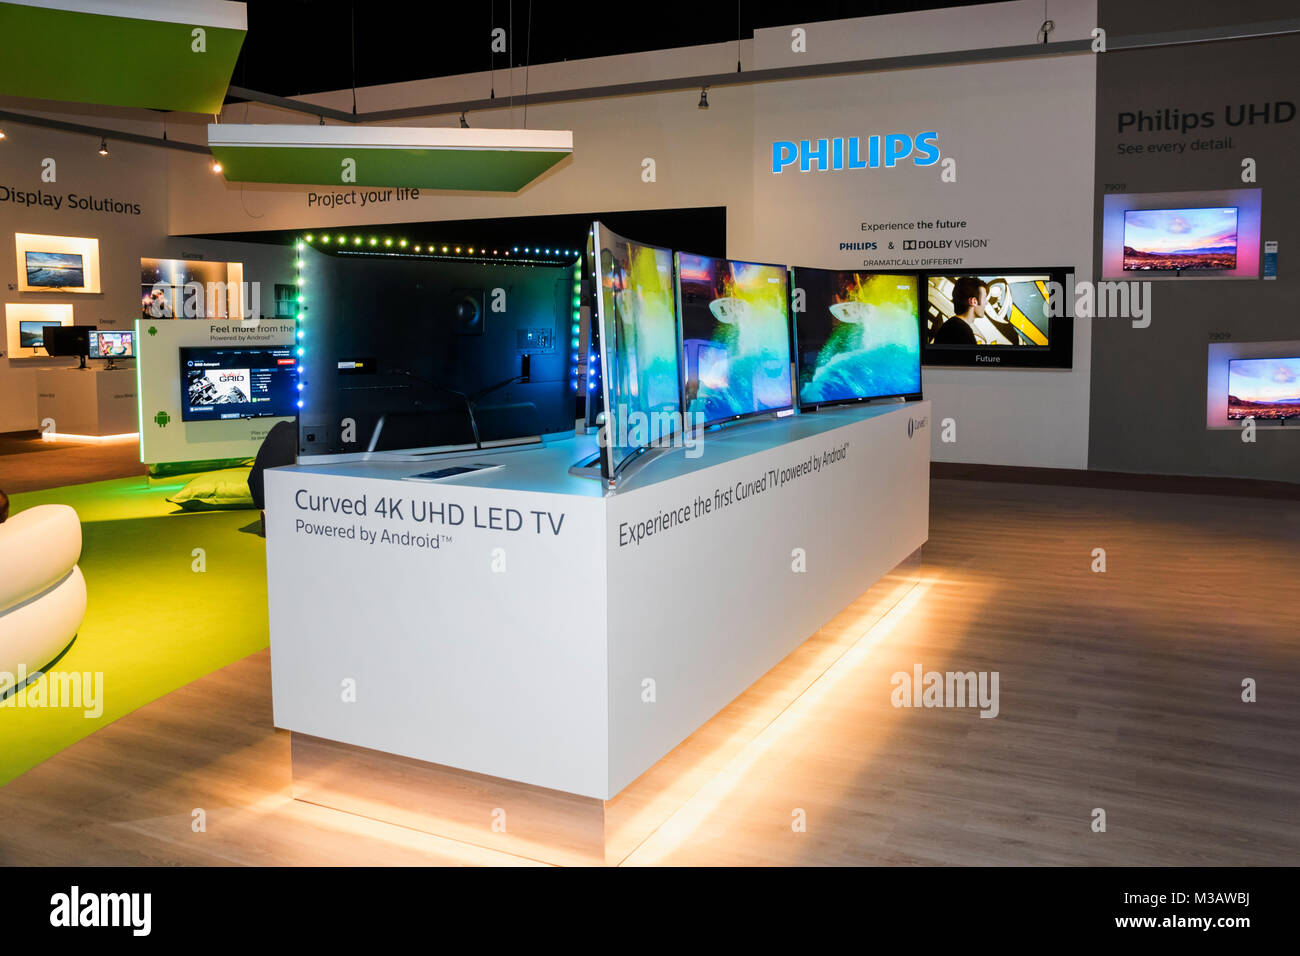 Philips Curved 4K UHD LED TV Powerred by Android in Halle 22 auf der IFA  2014 ( Internationale Funkausstellung ) unterm Funkturm in Berlin Stock  Photo - Alamy